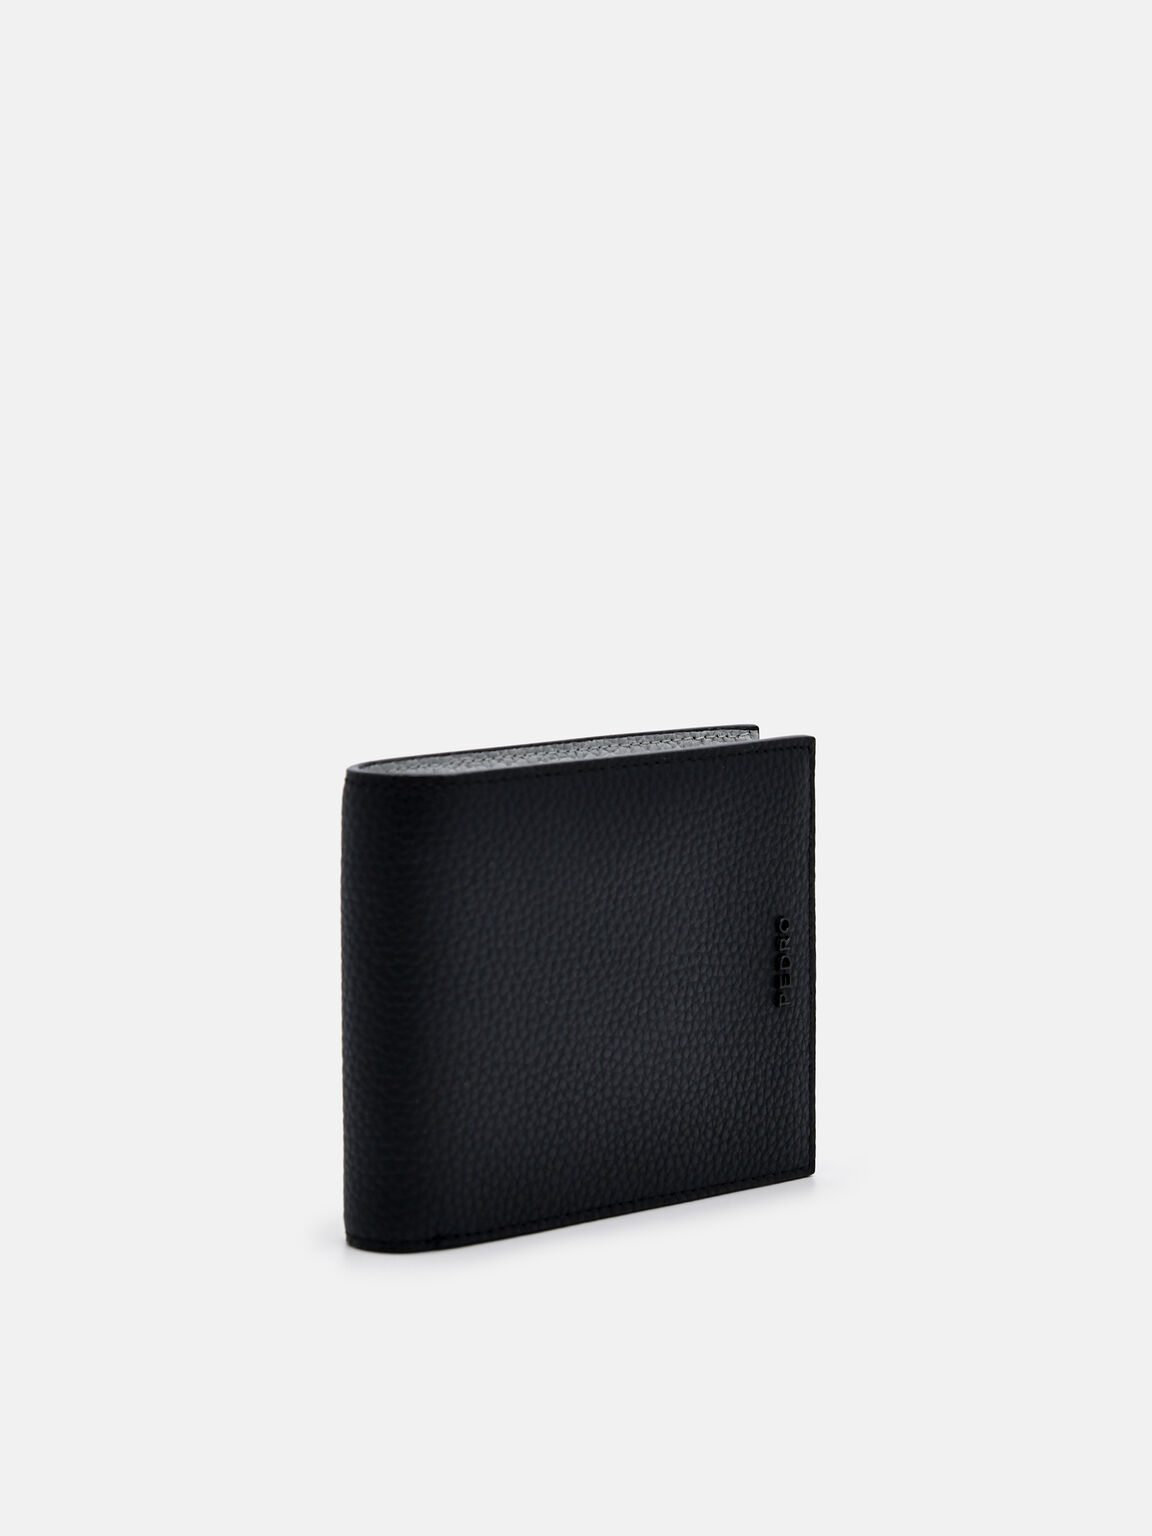 Embossed Leather Bi-Fold Wallet with Insert, Black